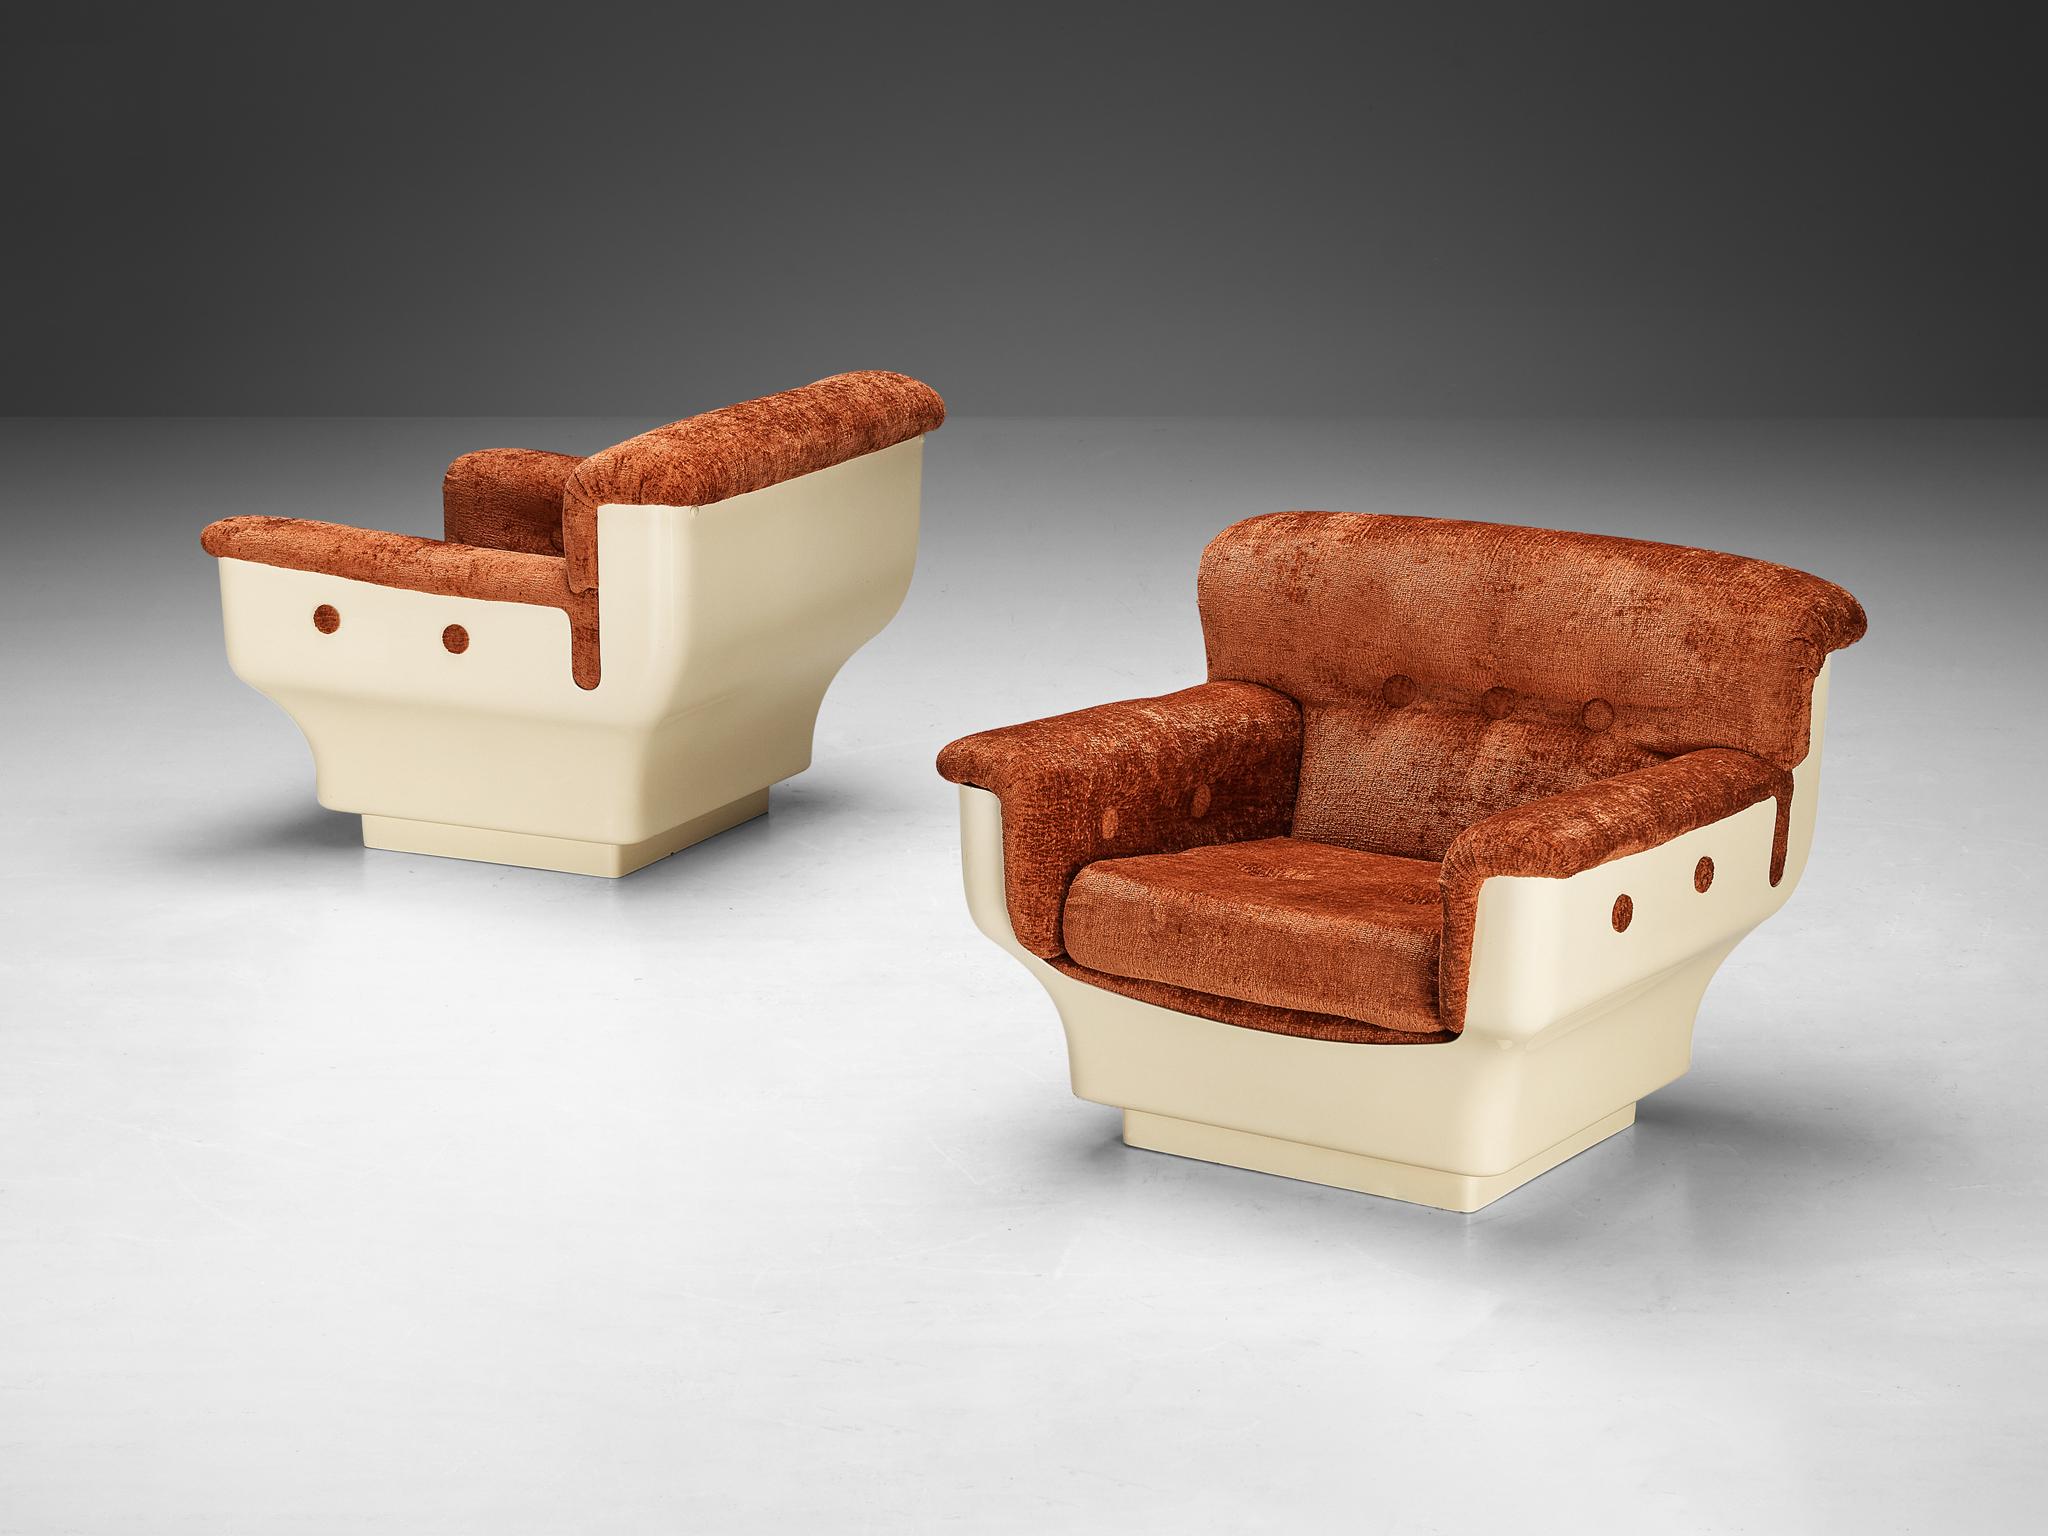 Studio Tecnico for Mobilquattro, ‘Delta 699’ lounge chairs, velvet, fiberglass, Italy, 1970s

The 'Delta 699' chairs, crafted by Studio Tecnico and G.G. Biemme for Mobilquattro, stand out for their distinctive postmodern design. They feature a base